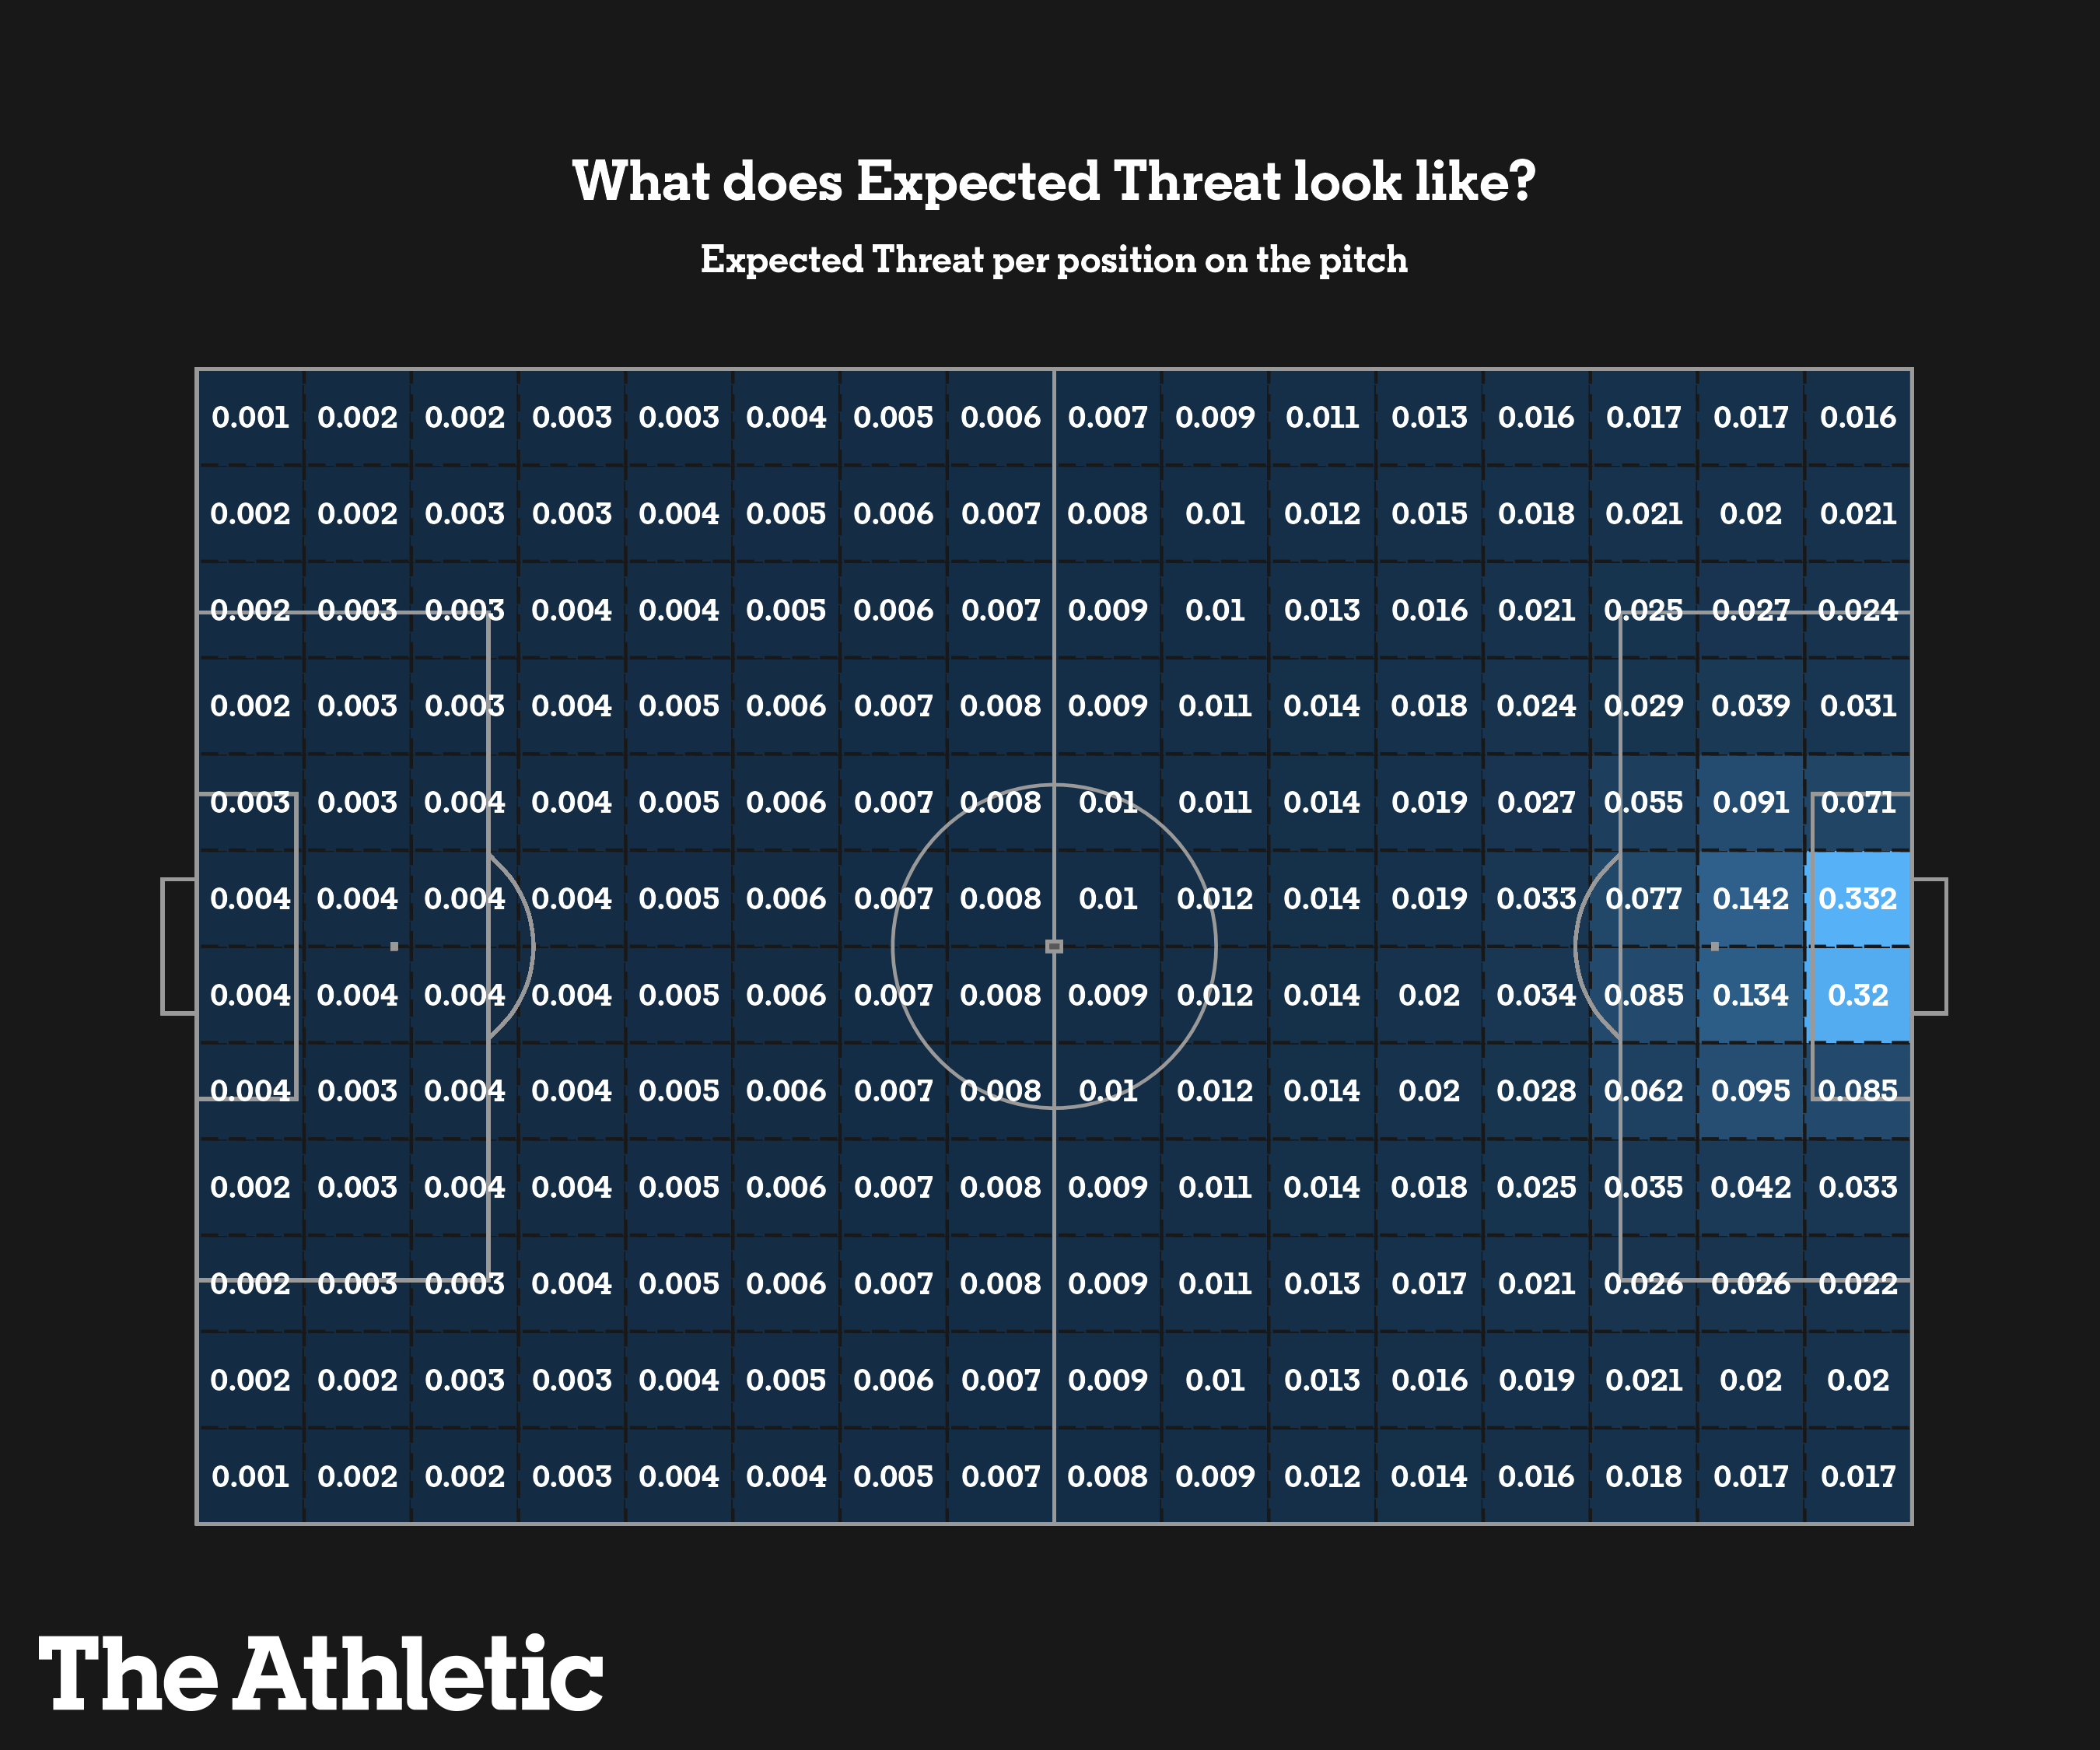 Image from The Athletic’s explainer piece on expected threat.